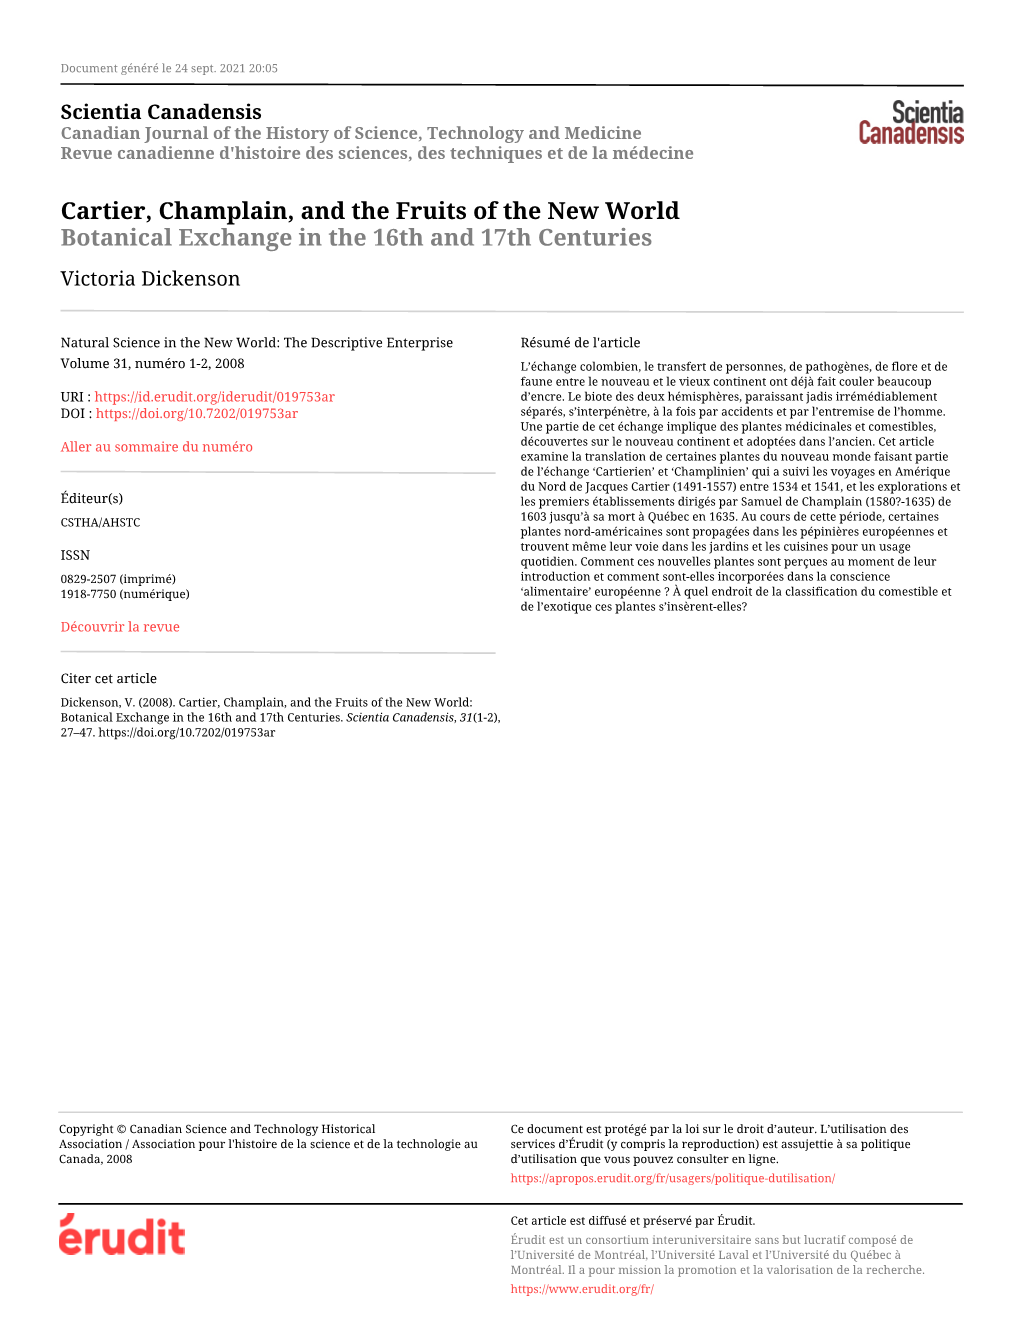 Cartier, Champlain, and the Fruits of the New World Botanical Exchange in the 16Th and 17Th Centuries Victoria Dickenson